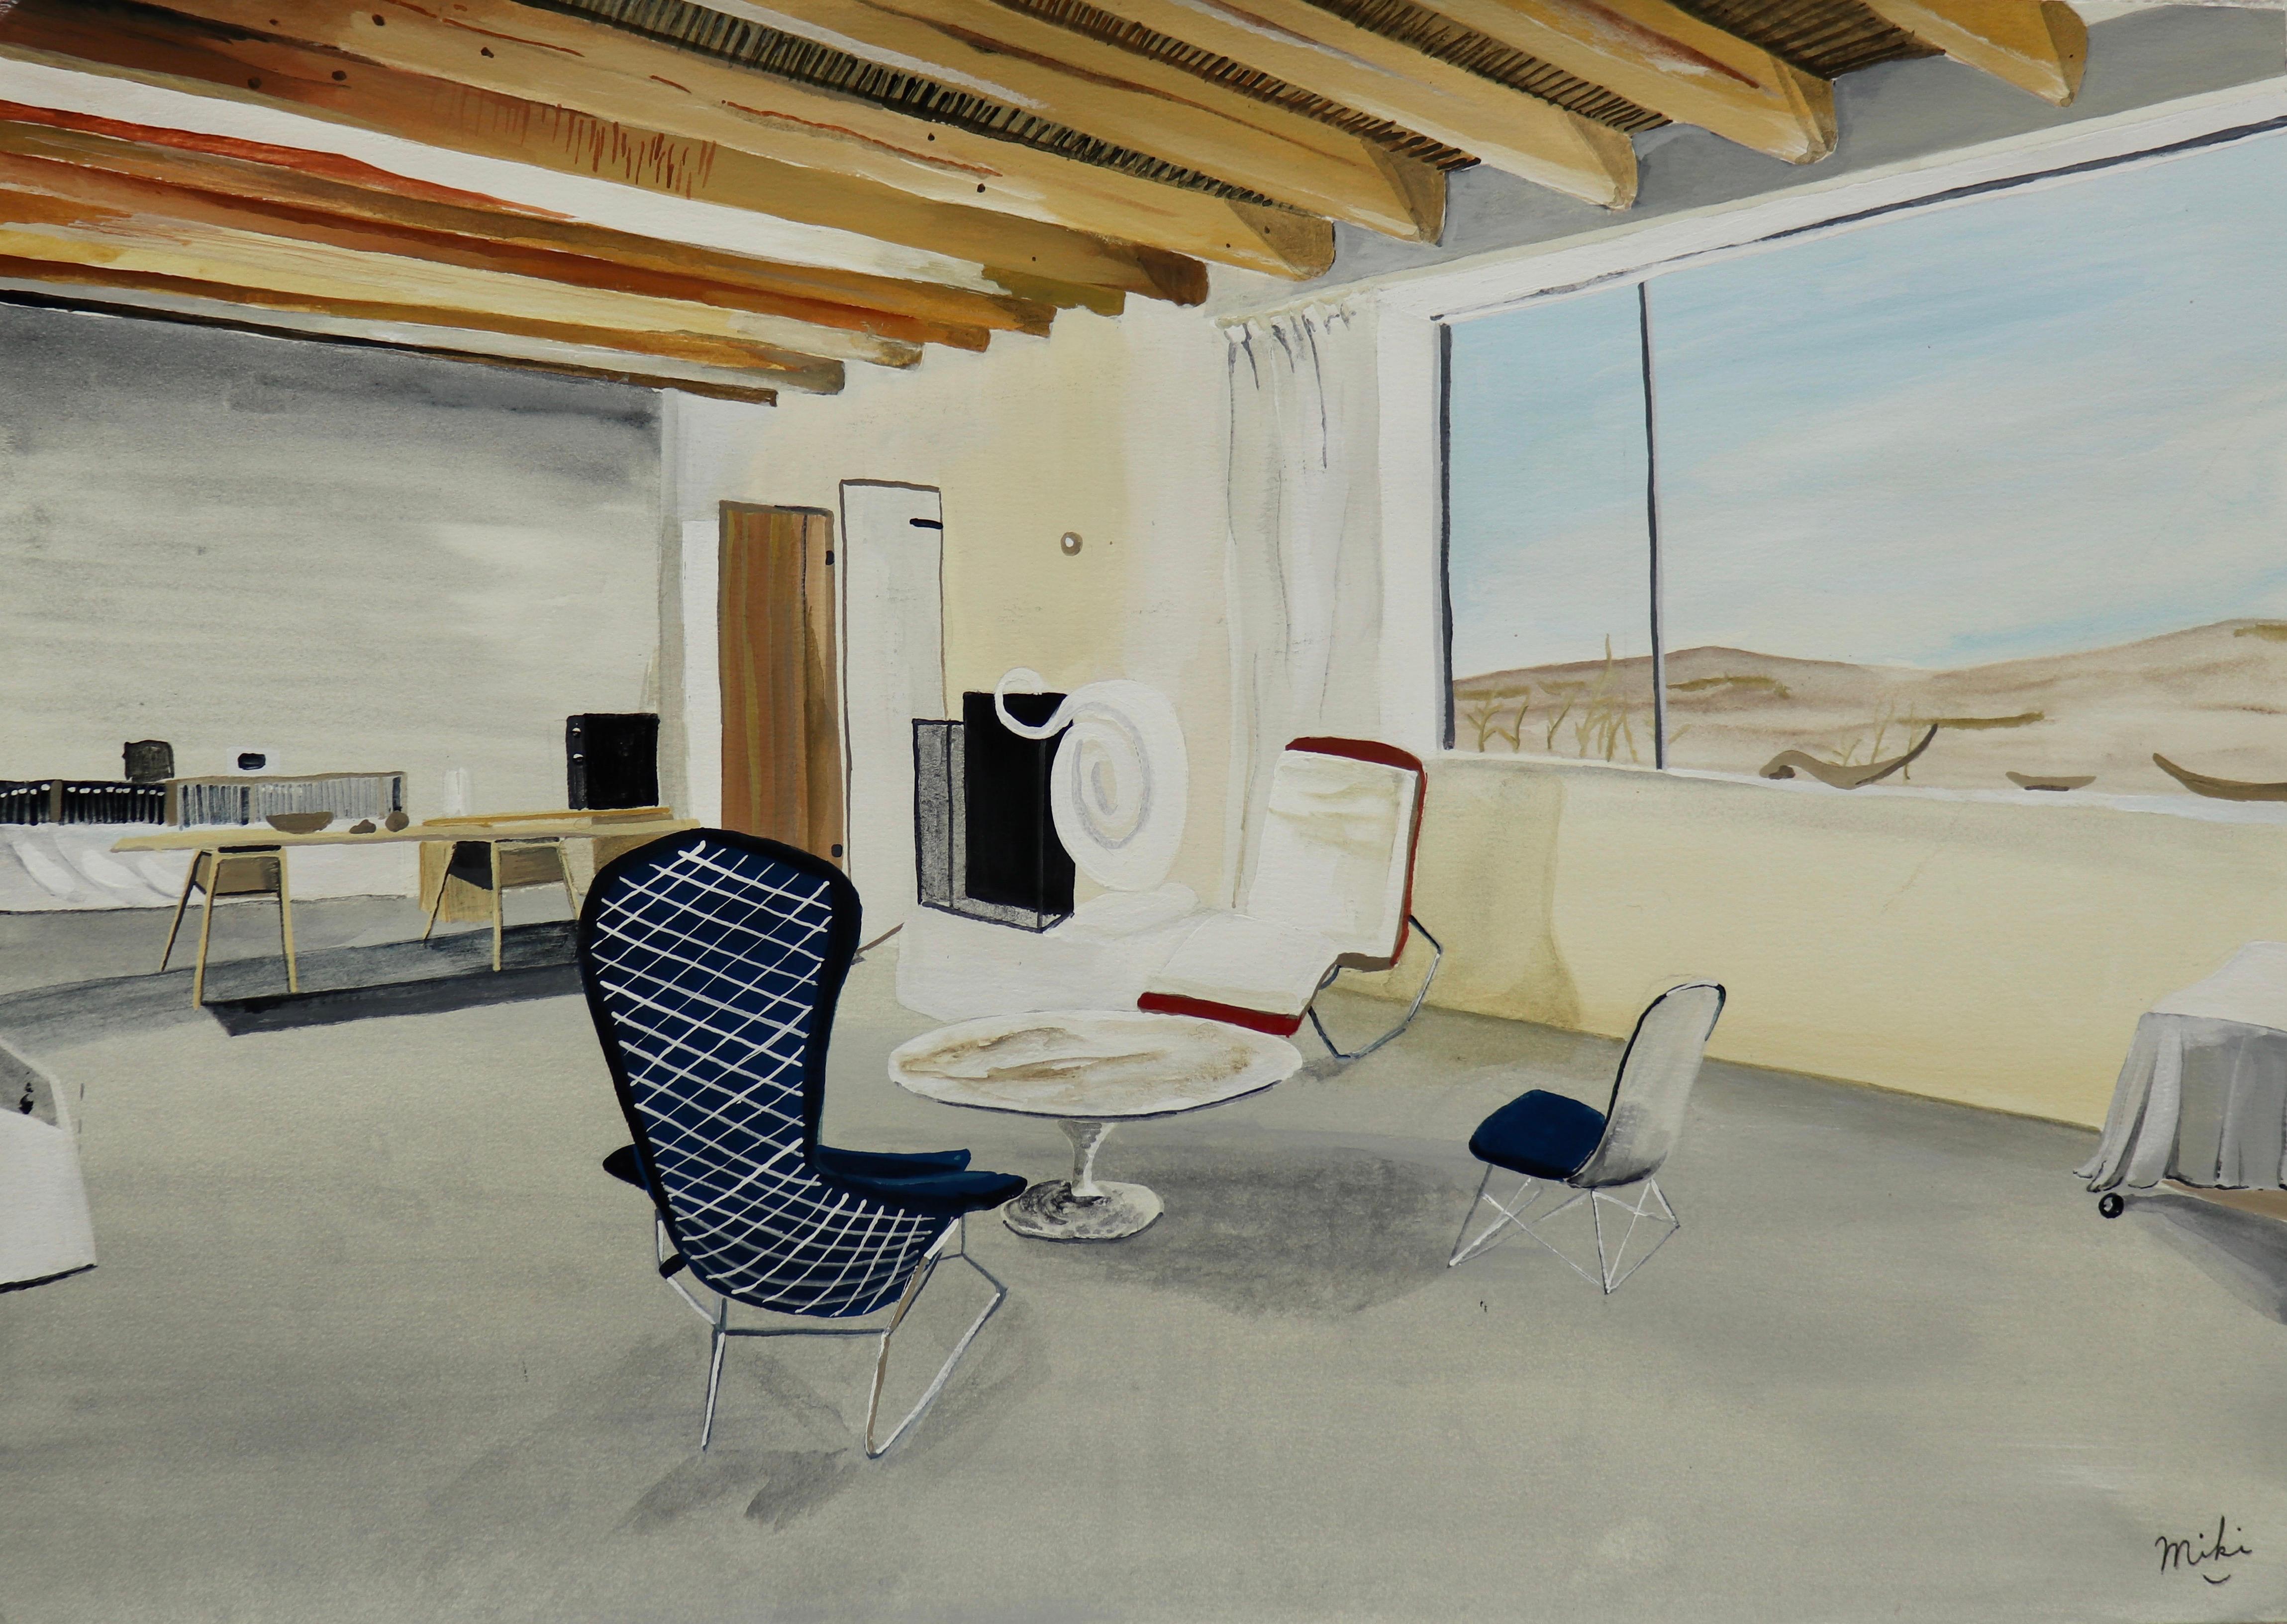 Georgia O'Keeffe's Studio & Fireplace, interiors, desert landscape, earth tones - Contemporary Painting by Miki Matsuyama